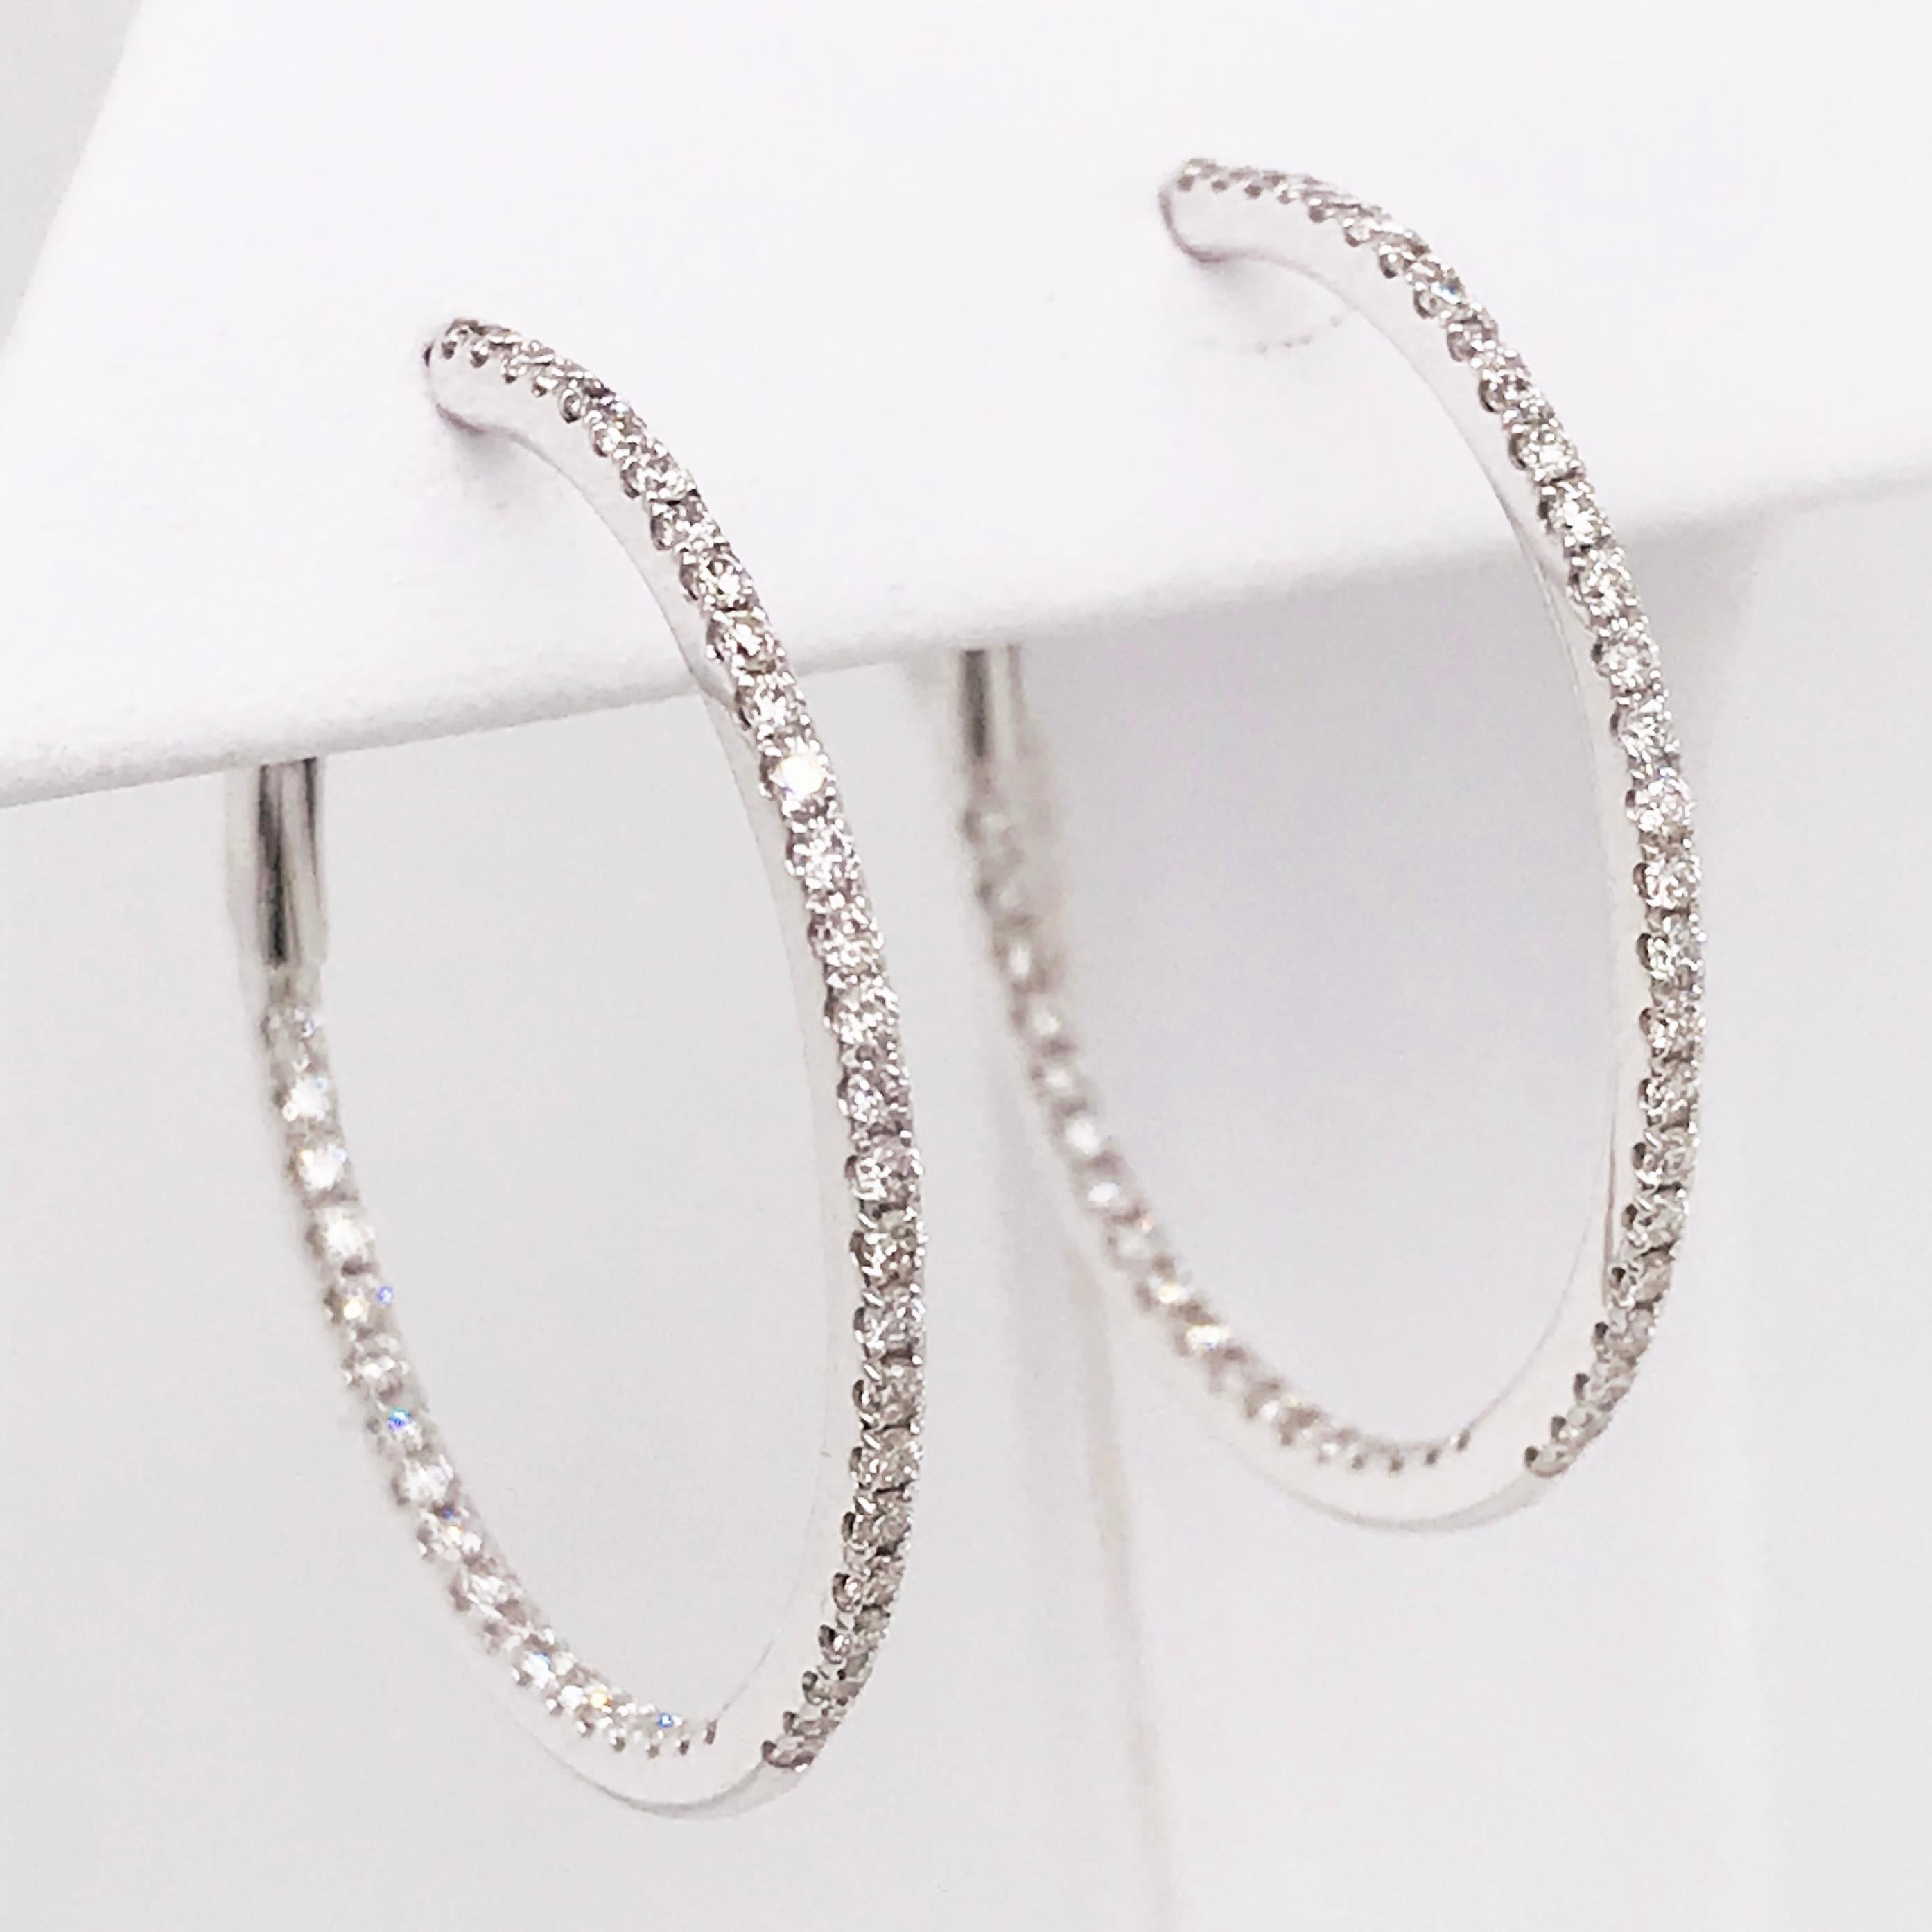 These diamond inside out hoops are a staple in any fine jewelry collection. The 1 inch diameter is a perfect size for any occasion. They can be worn casually or for a more formal event. 

The hoops have round brilliant diamonds covering the top